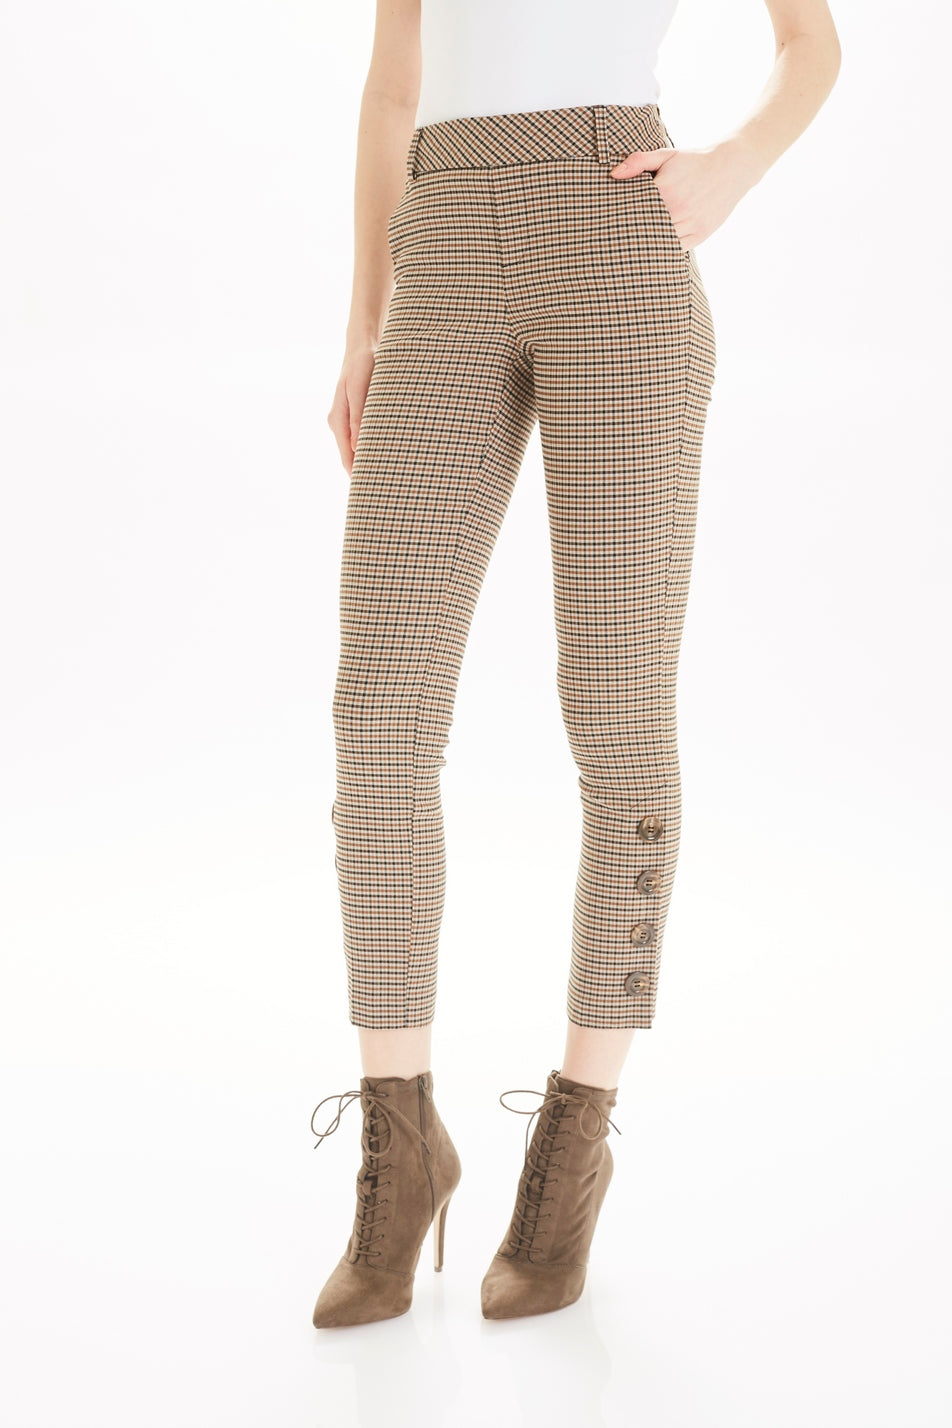 THE GWYNETH BUTTON TROUSER - TYLER MADISON